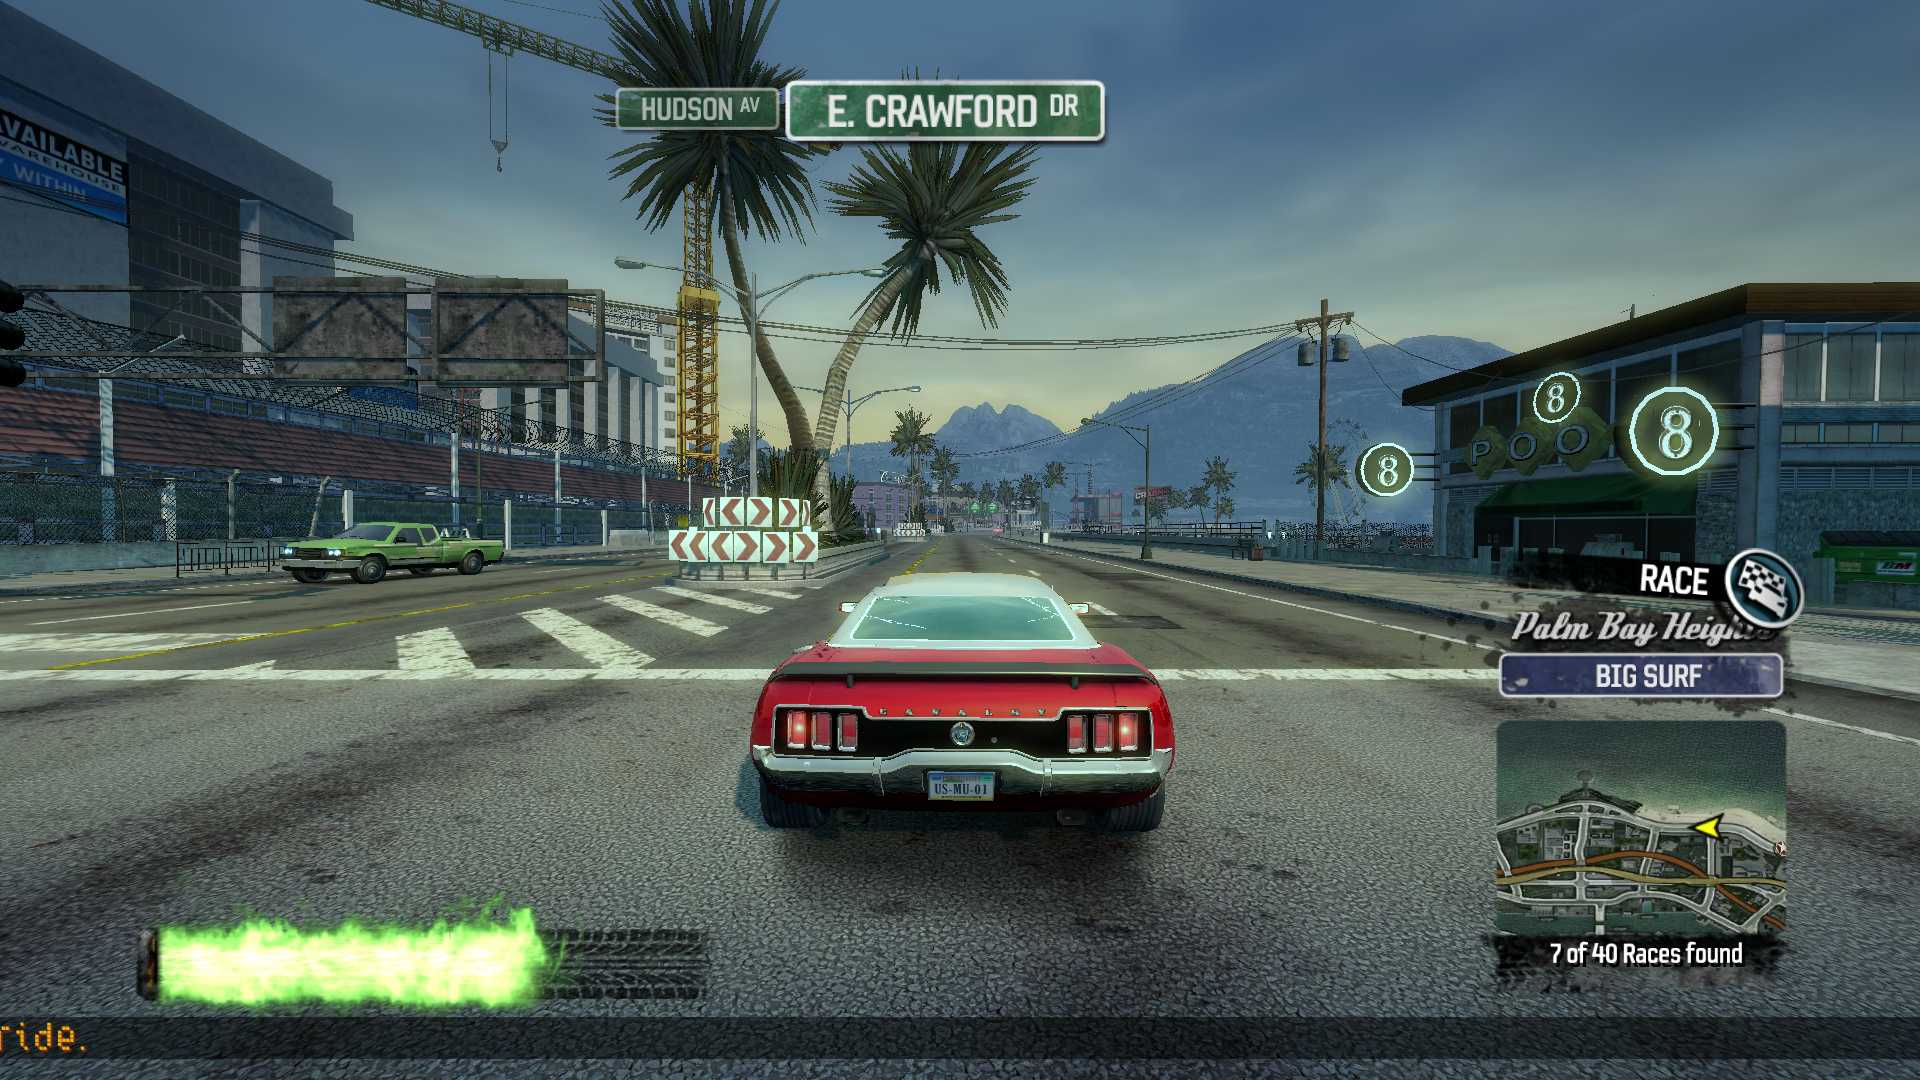 Nfs rival highly compressed pc 652 mb